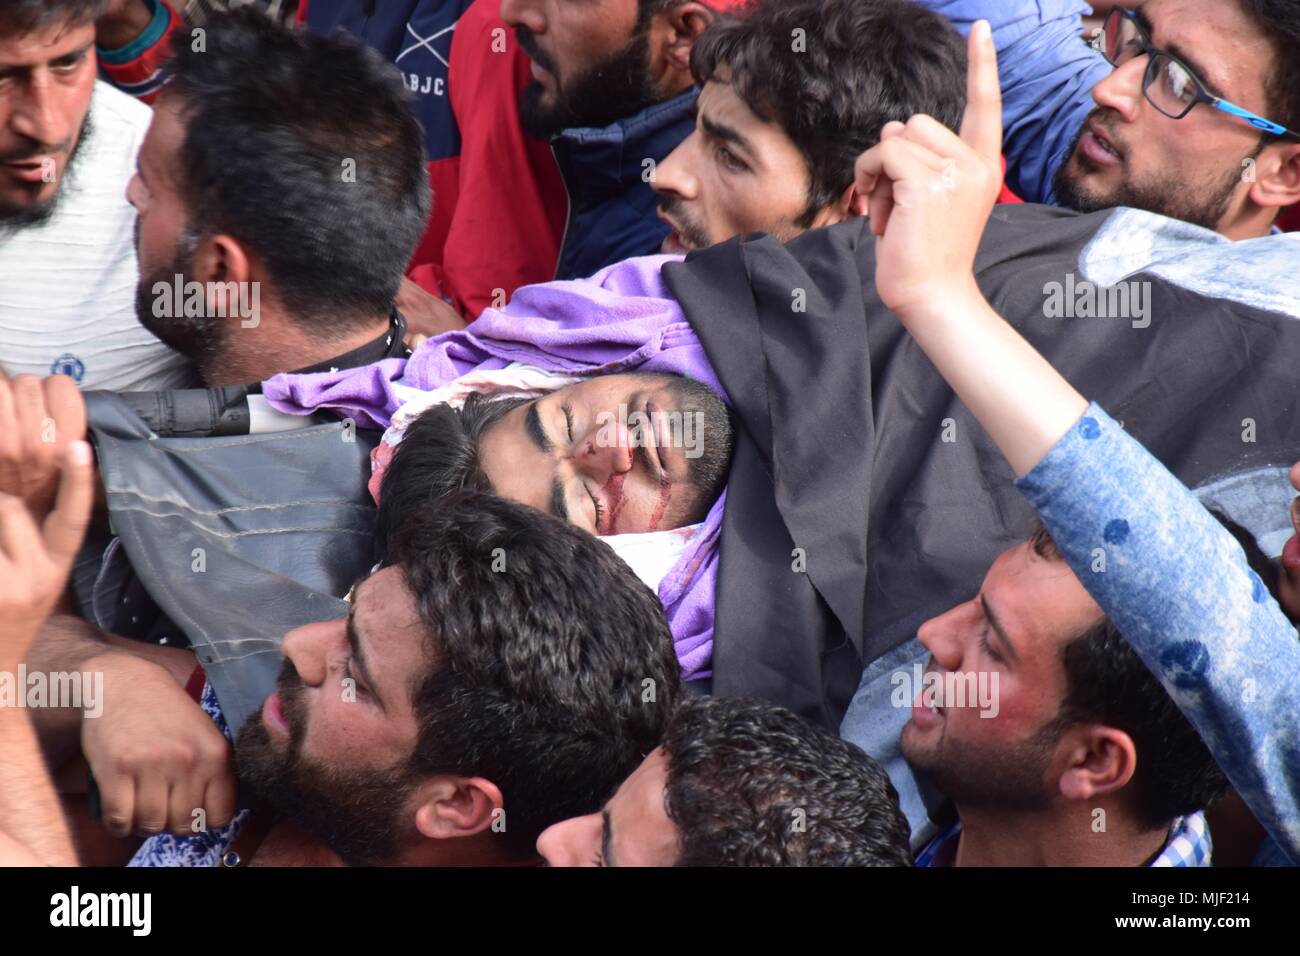 Srinagar, Jammu & Kashmir, India, May 5, 2018.  (EDITORS NOTE: Image depicts death.).People carrying the body of civilian Adil Ahmed Yatoo who got killed by armoured vehicle during clashes near Encounter site for burial During his funeral procession in Srinagar summer capital of Kashmir.Multiple Funeral processions held in srinagar summer capital of Indian Kashmir on Saturday of Fayaz Ahmed Hamal a LeT (Lashkar-e-Taiba) Militant and a Civilian Adil Ahmed Yatoo who were killed by armoured vehicle on Saturday during clashes near Encounter site. child Credit: ZUMA Press, Inc./Alamy Live News Stock Photo